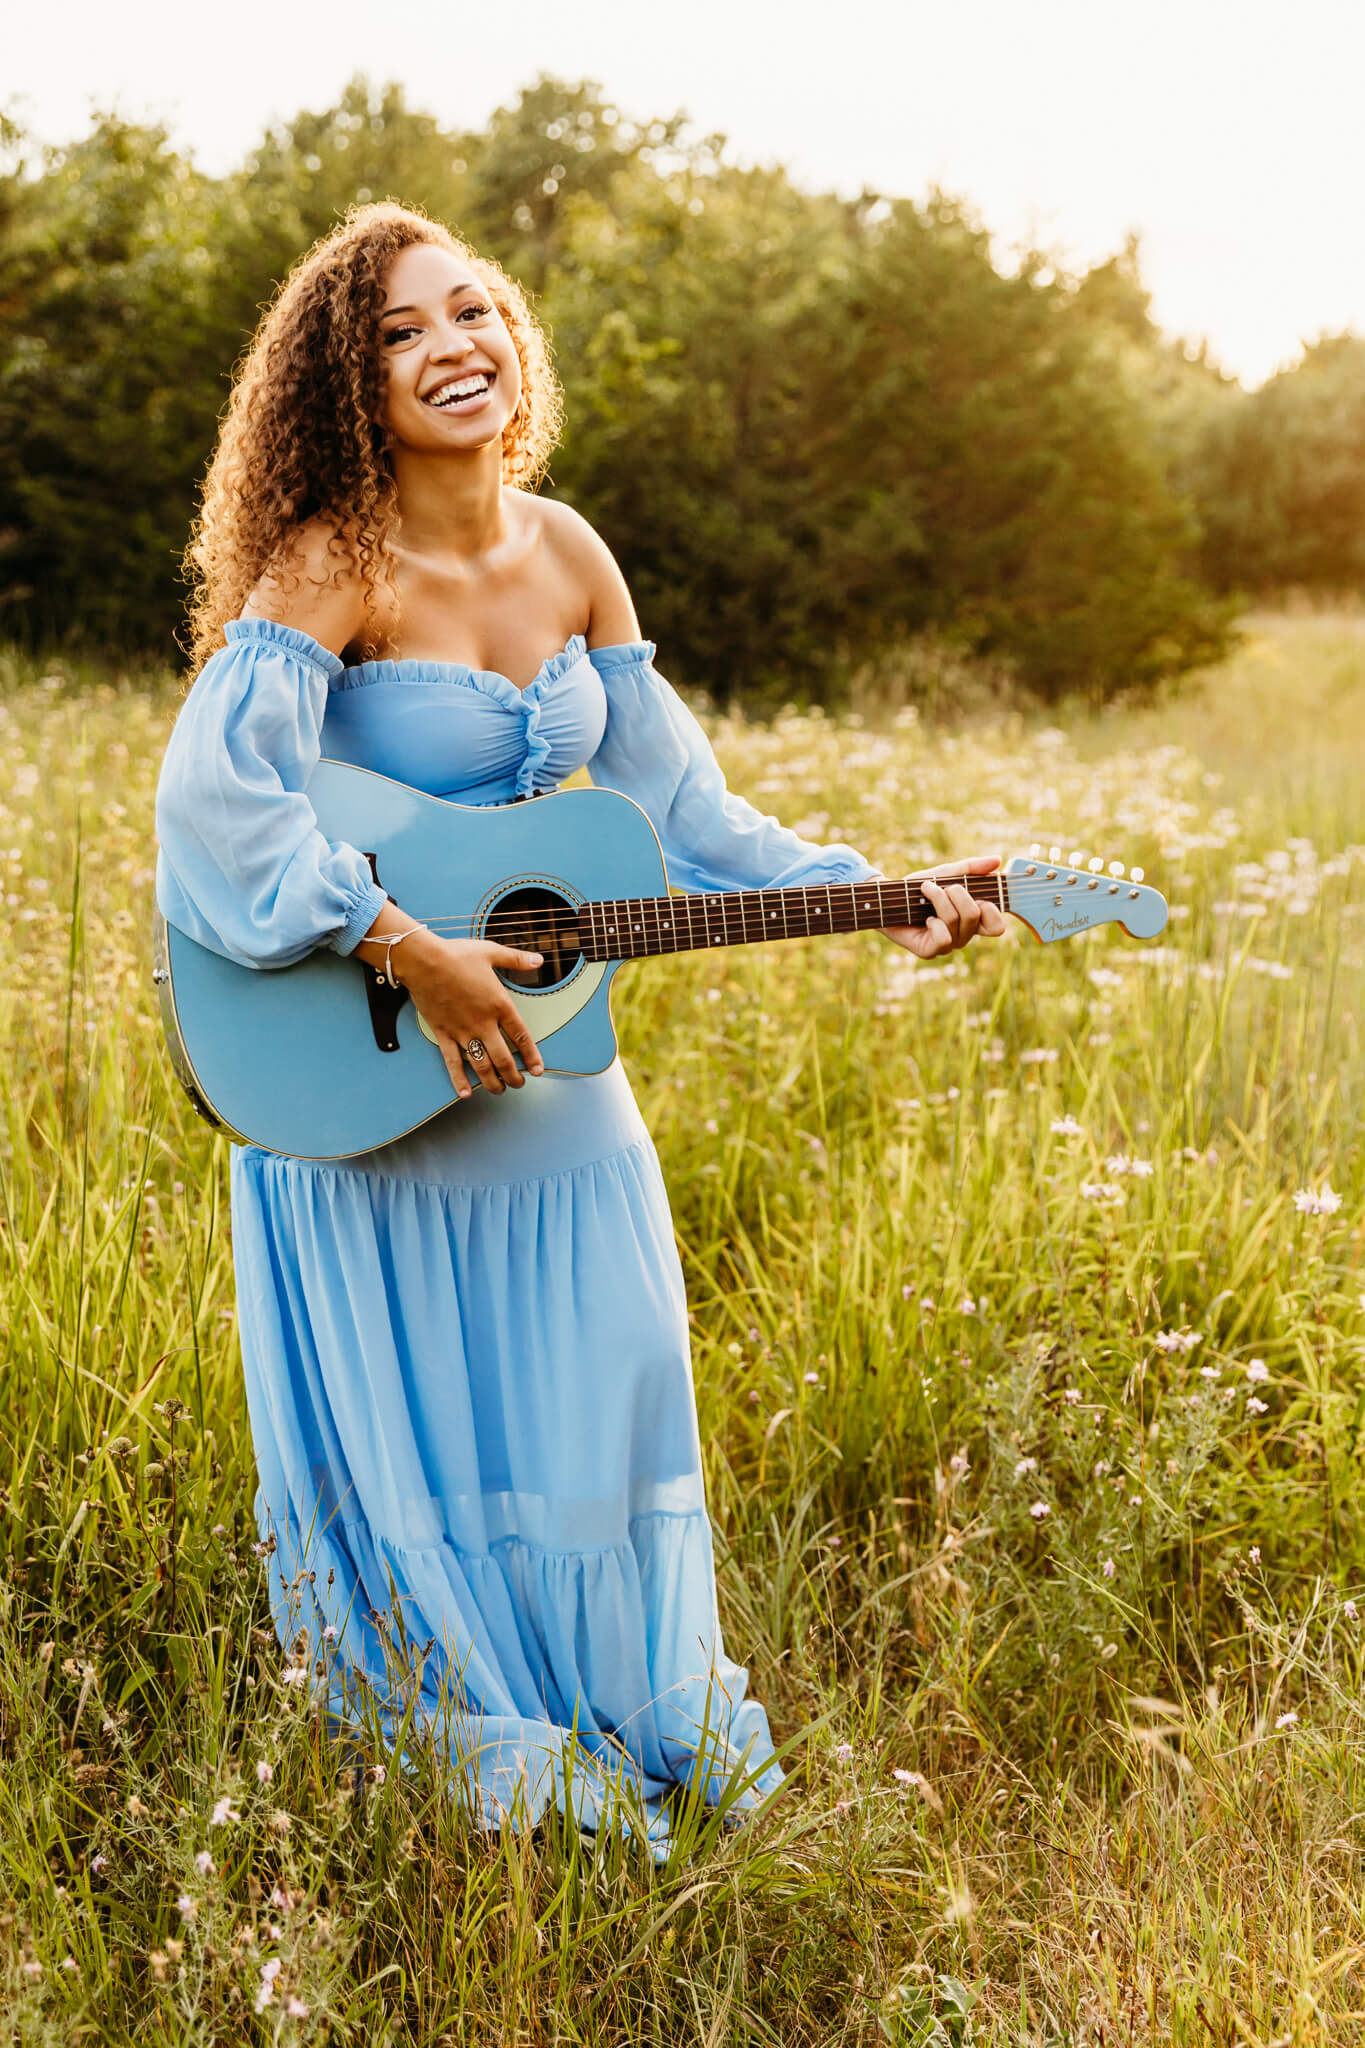 high school senior in a blue dress playing her guitar at sunset in a field